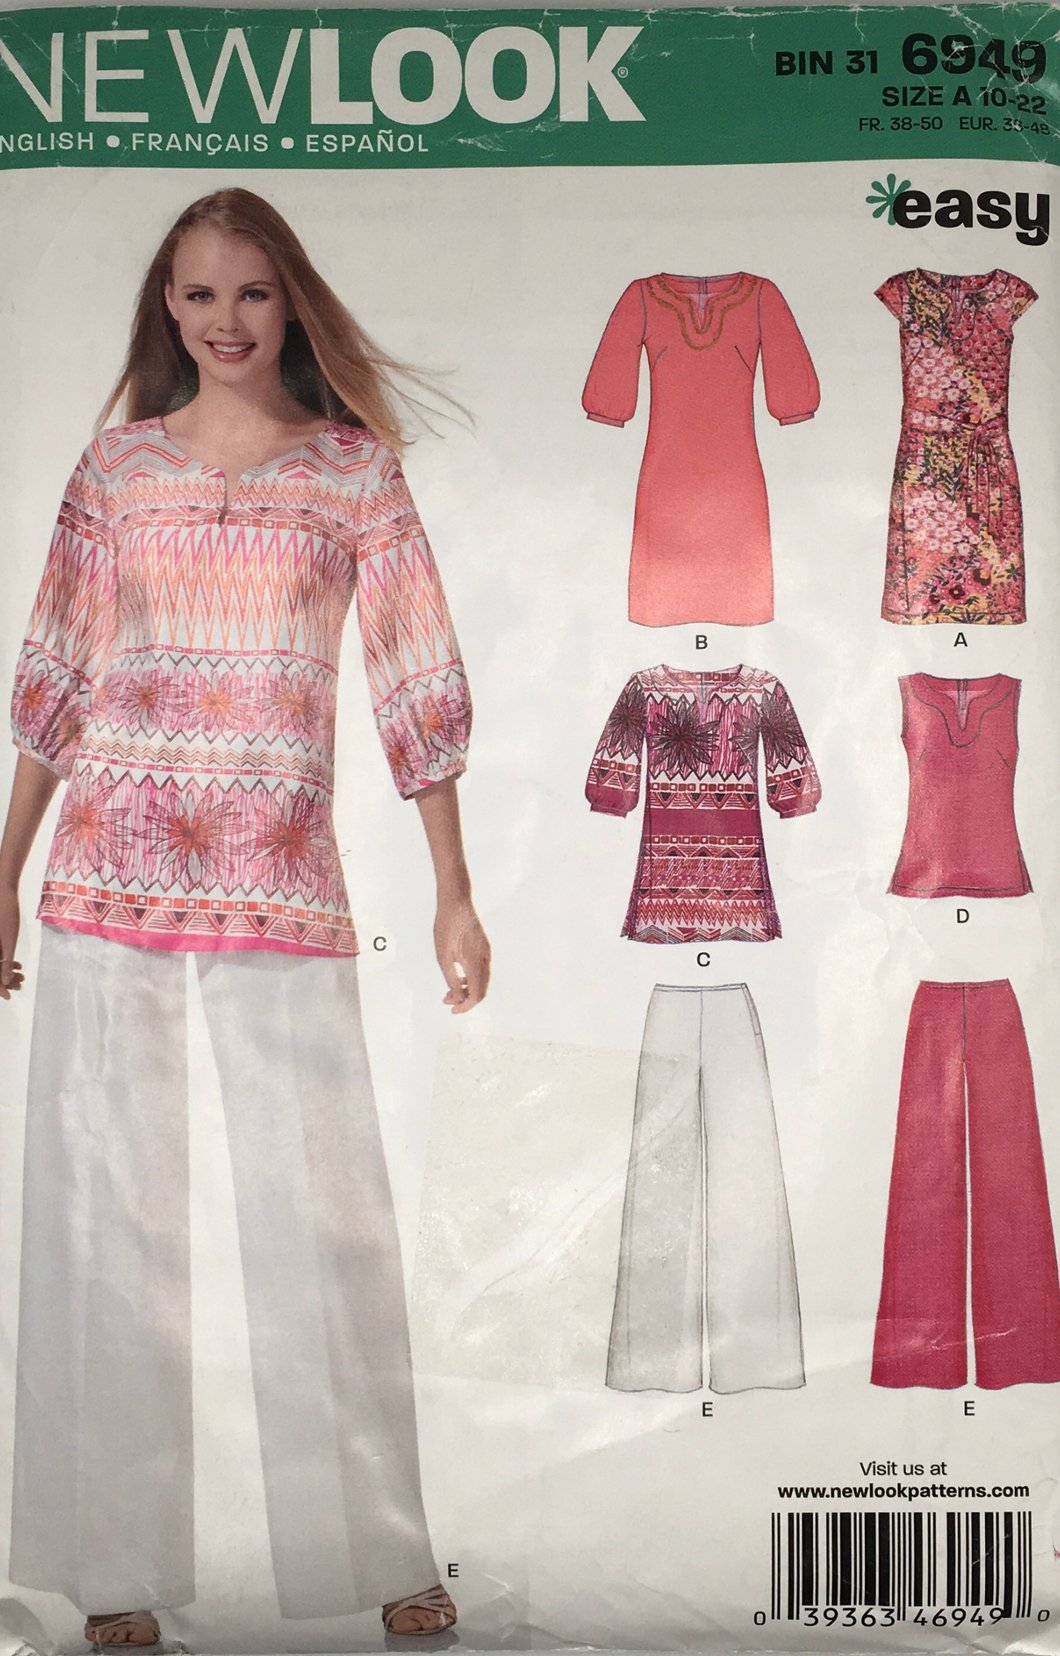 2010 Sewing Pattern: New Look 6949